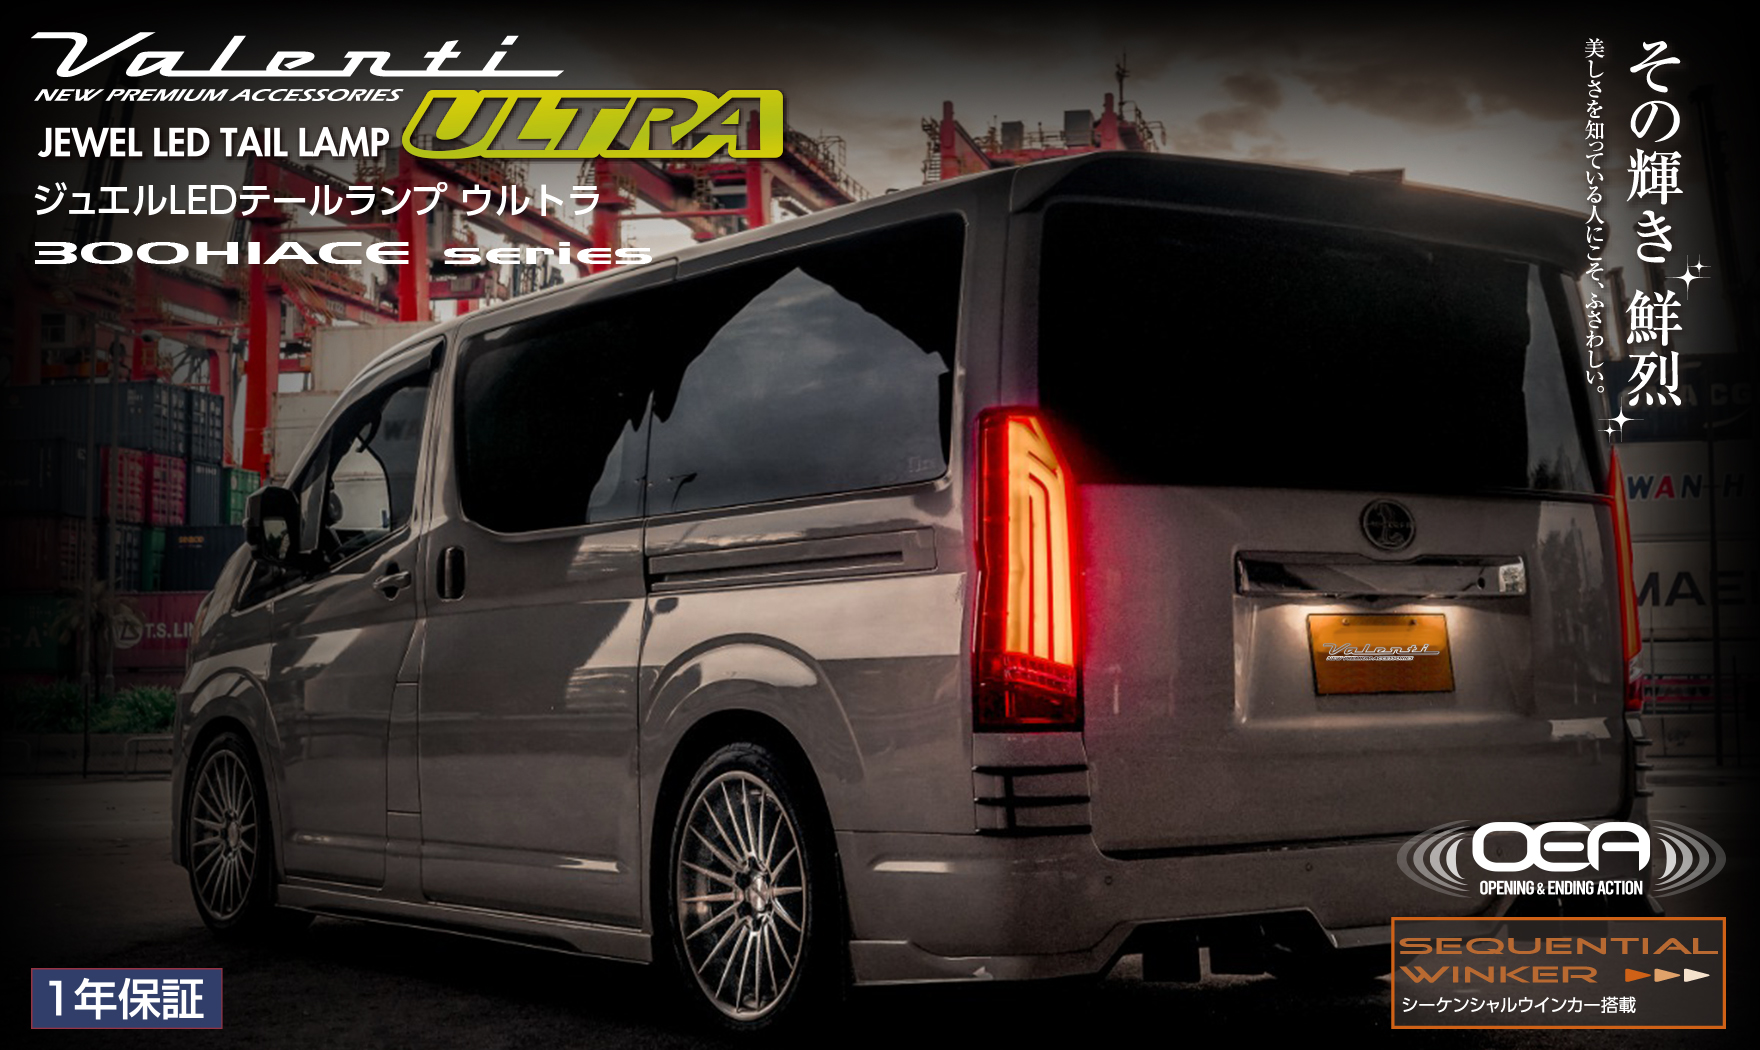 Toyota 300 series Hiace(Overseas exclusive model)JEWEL LED TAIL